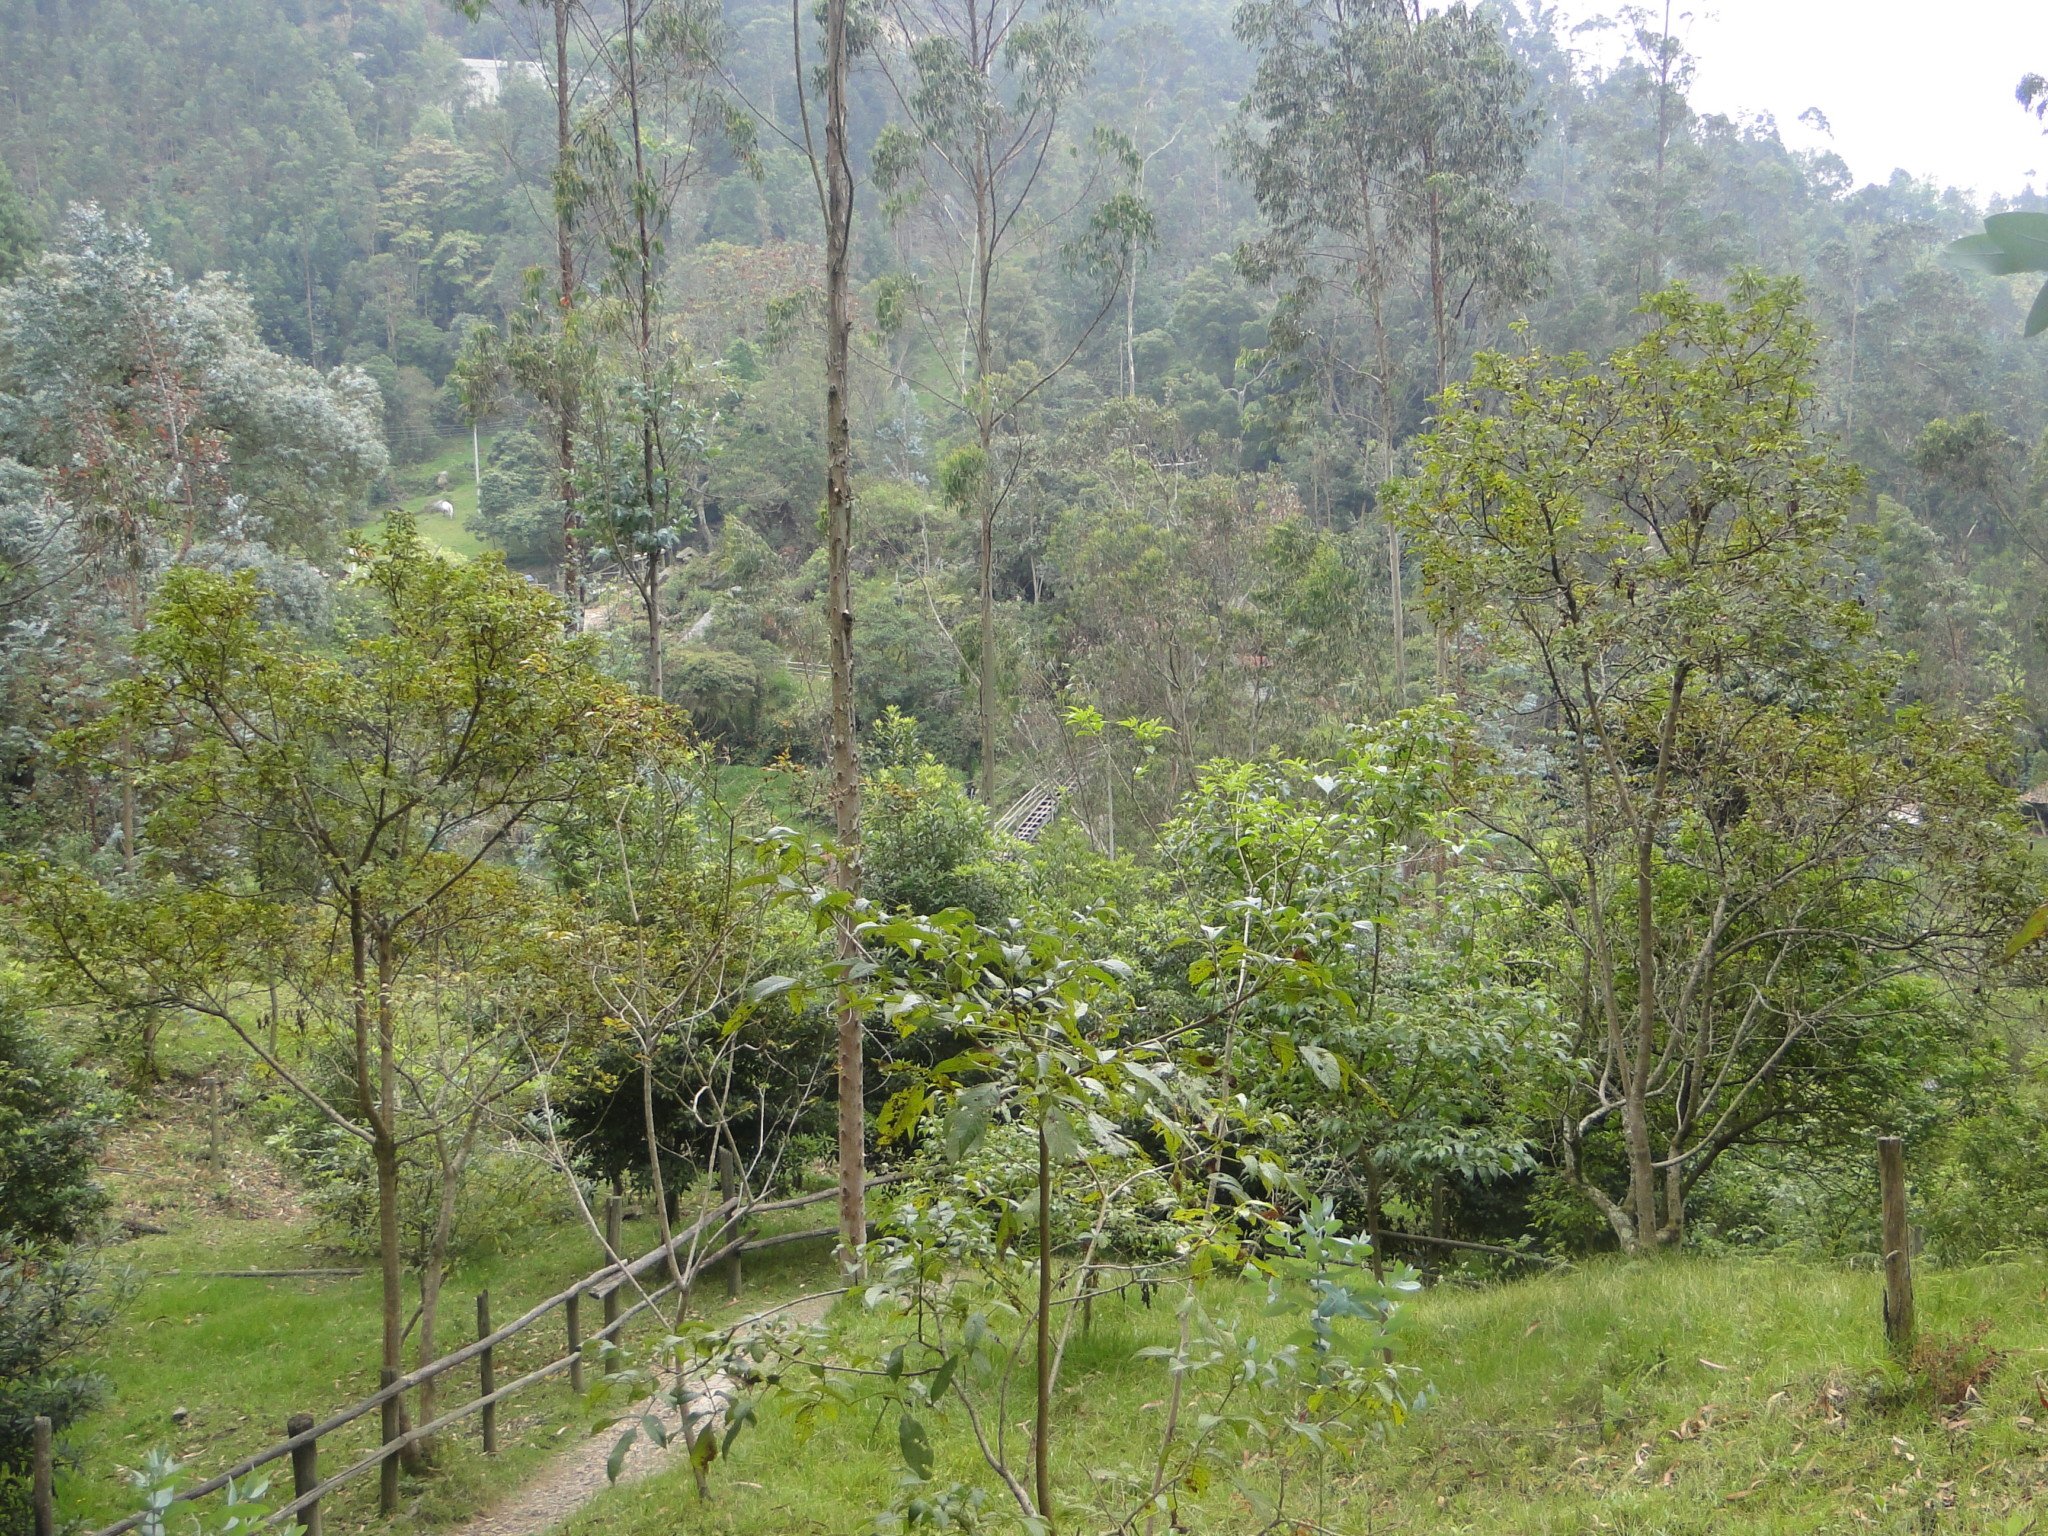 Biological corridors: Five conservation initiatives in Colombia